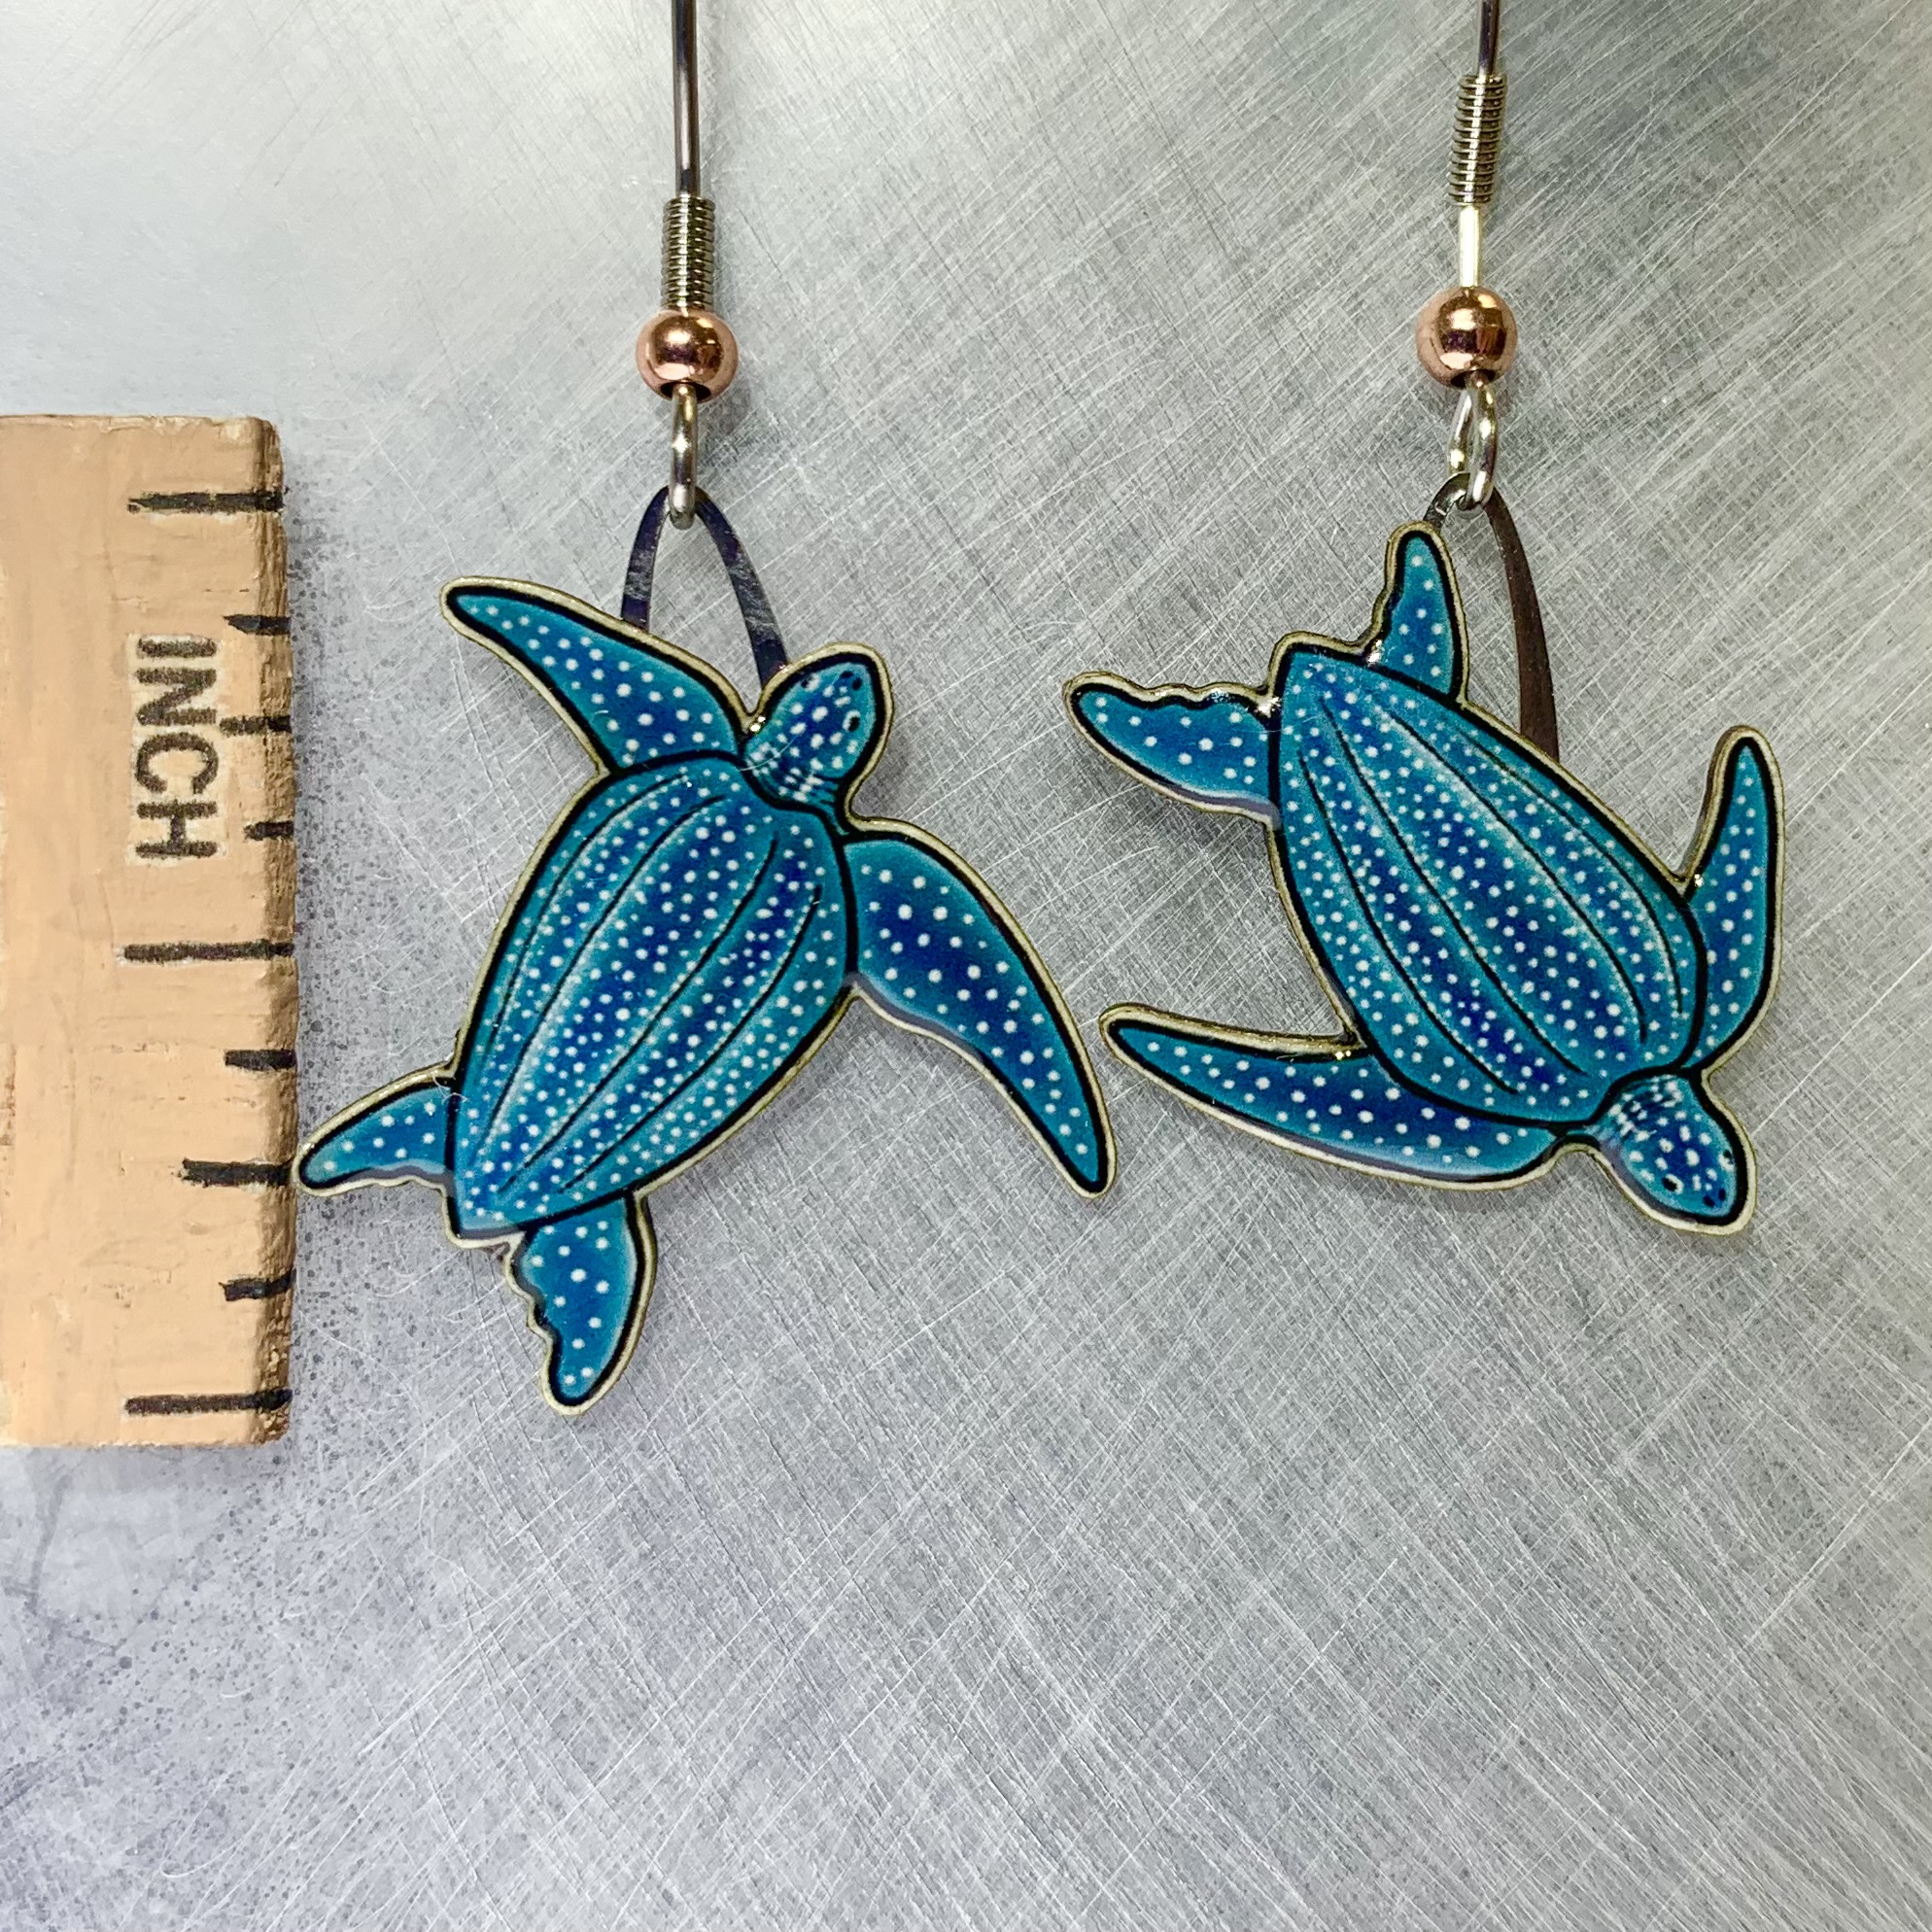 Picture shown is of 1 inch tall pair of earrings of the marine animal the Leatherback Sea Turtle.